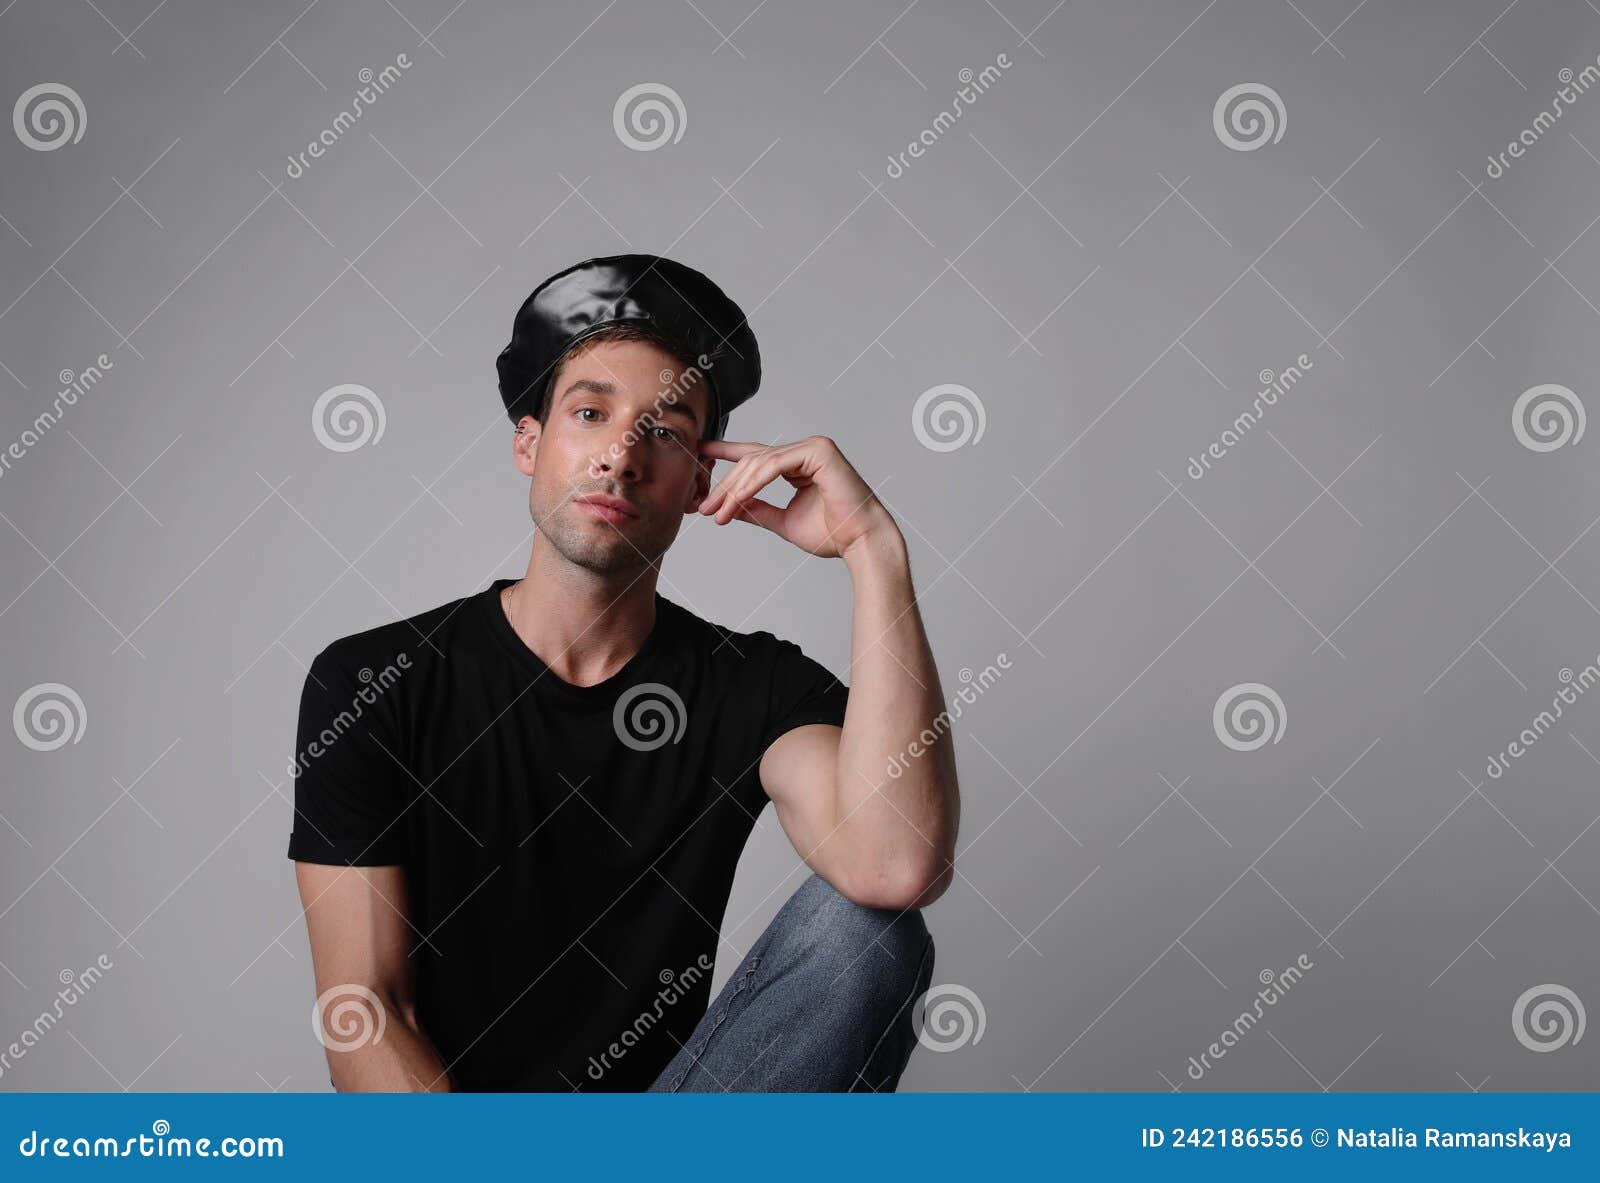 portrait of stylish young man with serious face expression. white background.